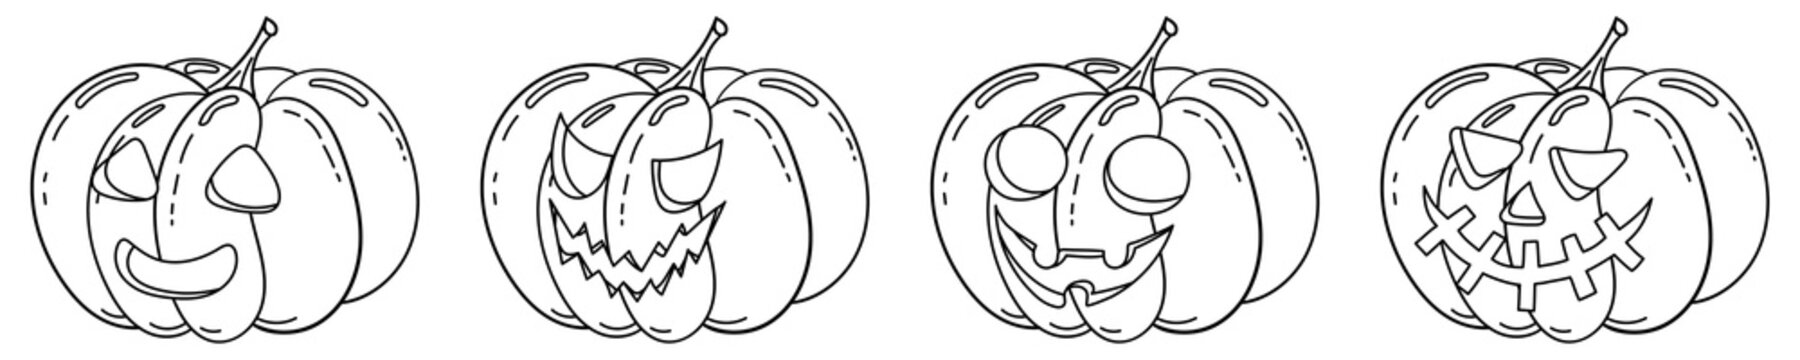 Coloring page with halloween pumpkin icon set